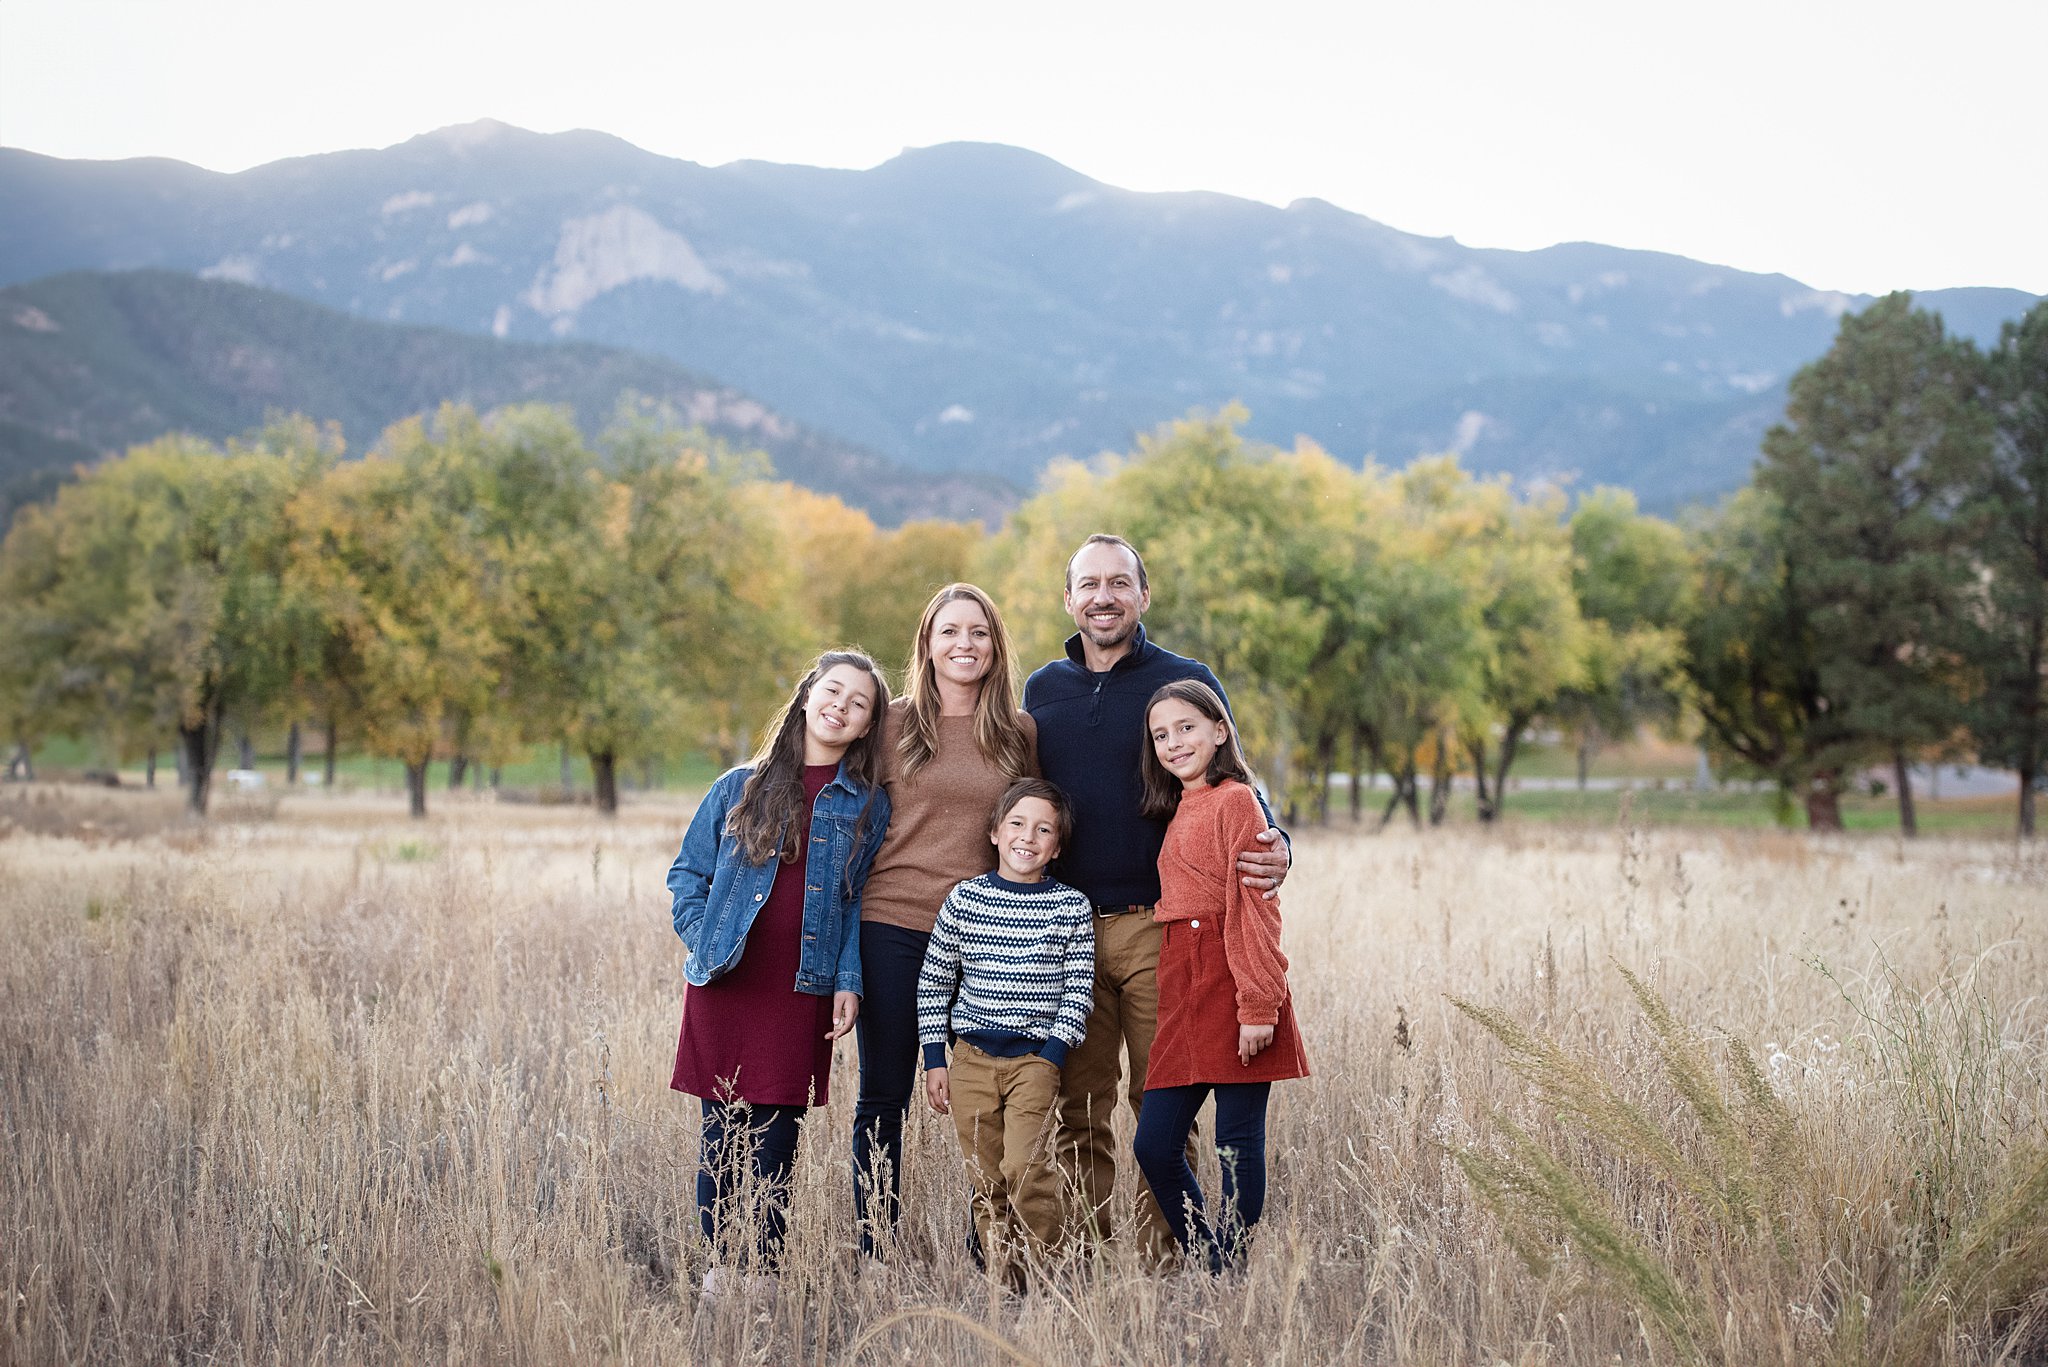 A family of 5 stands together in a field of tall golden grass in the mountains